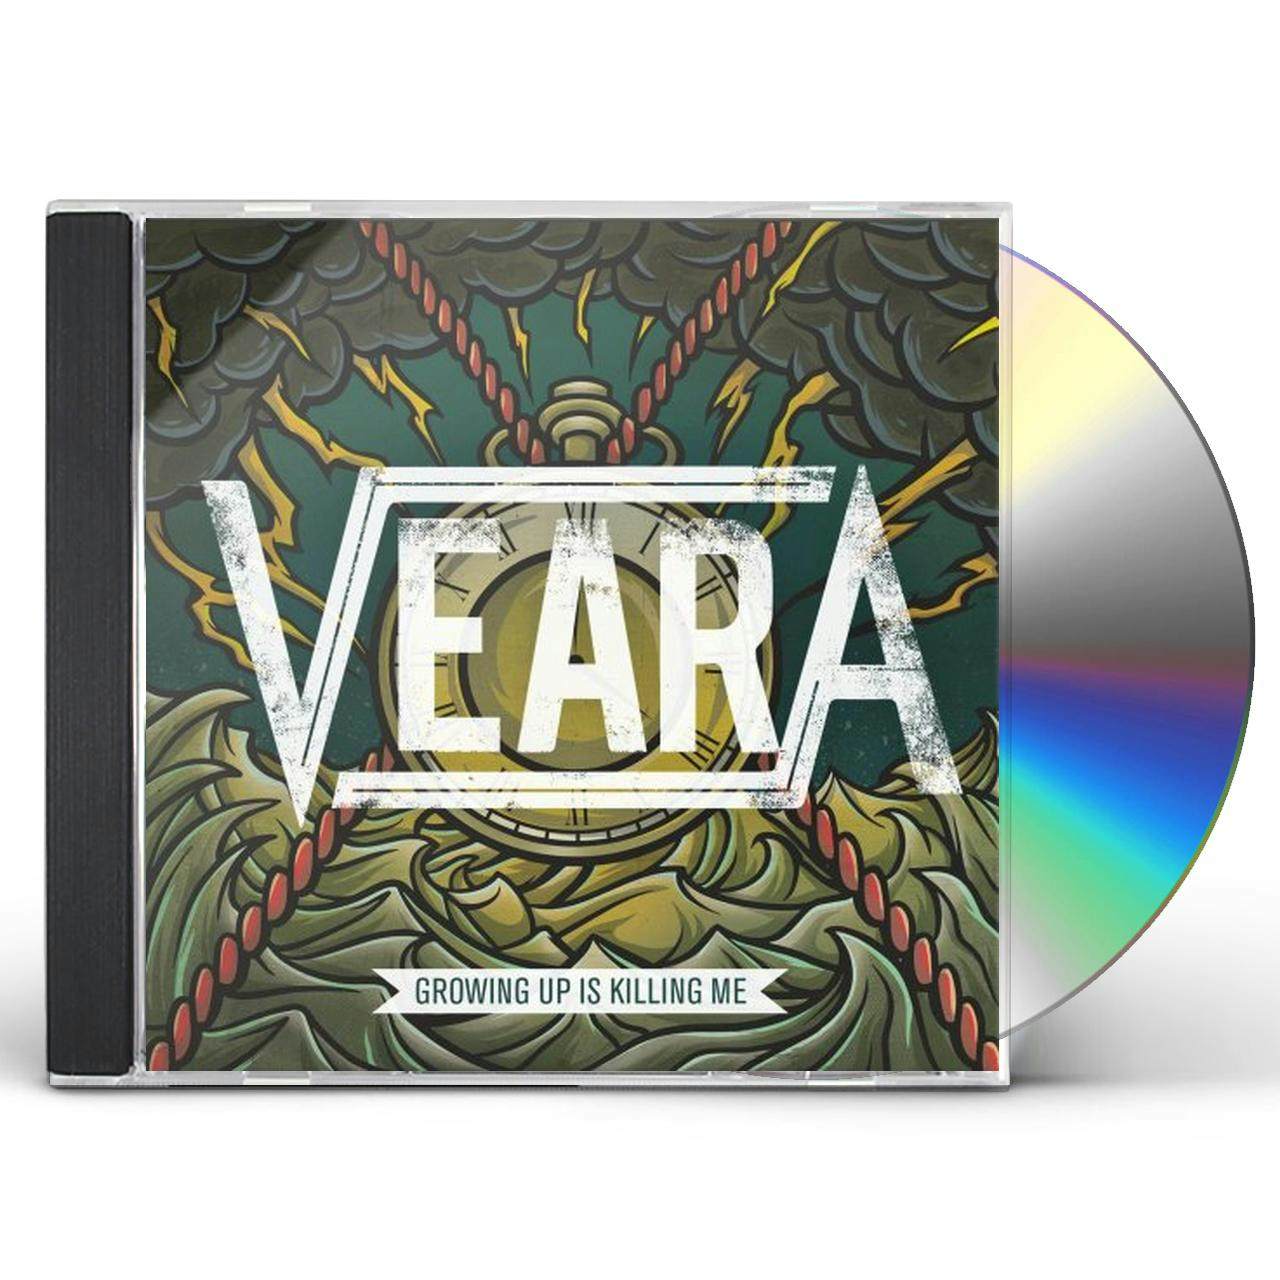 growing up is killing me (mod) cd - Veara